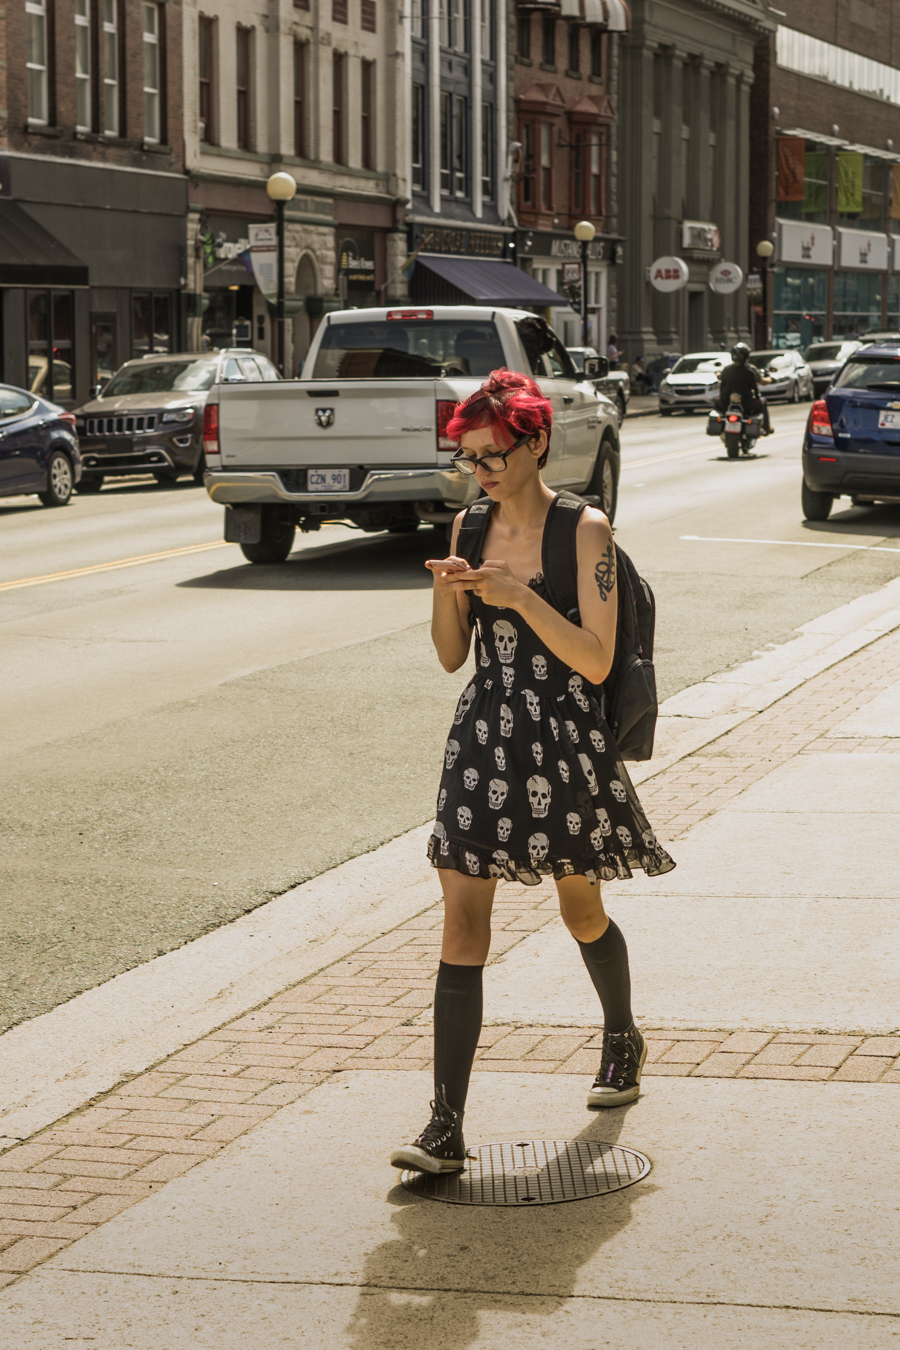 Skull dresses and chuck Taylor’s, texting while walking - water street 